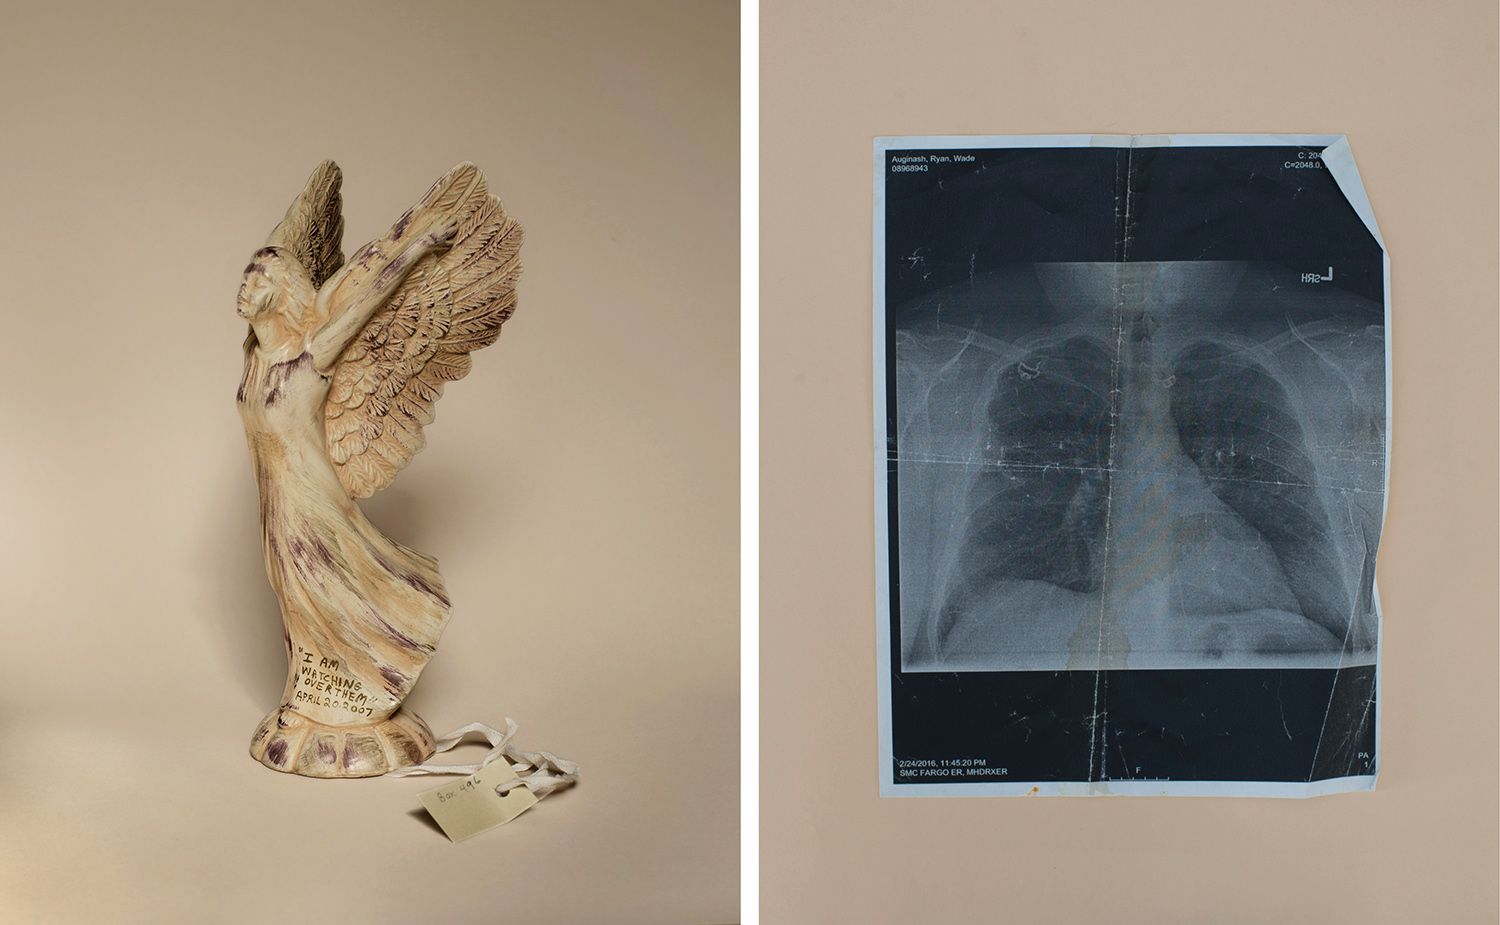 (L): Angel: Item from the April 16, 2007, Condolence Archives, Virginia Tech Special Collections Library. Blacksburg, VA. (R): Chest x-ray, Ryan Auginash. Image by Andres Gonzalez. Virginia, 2018.